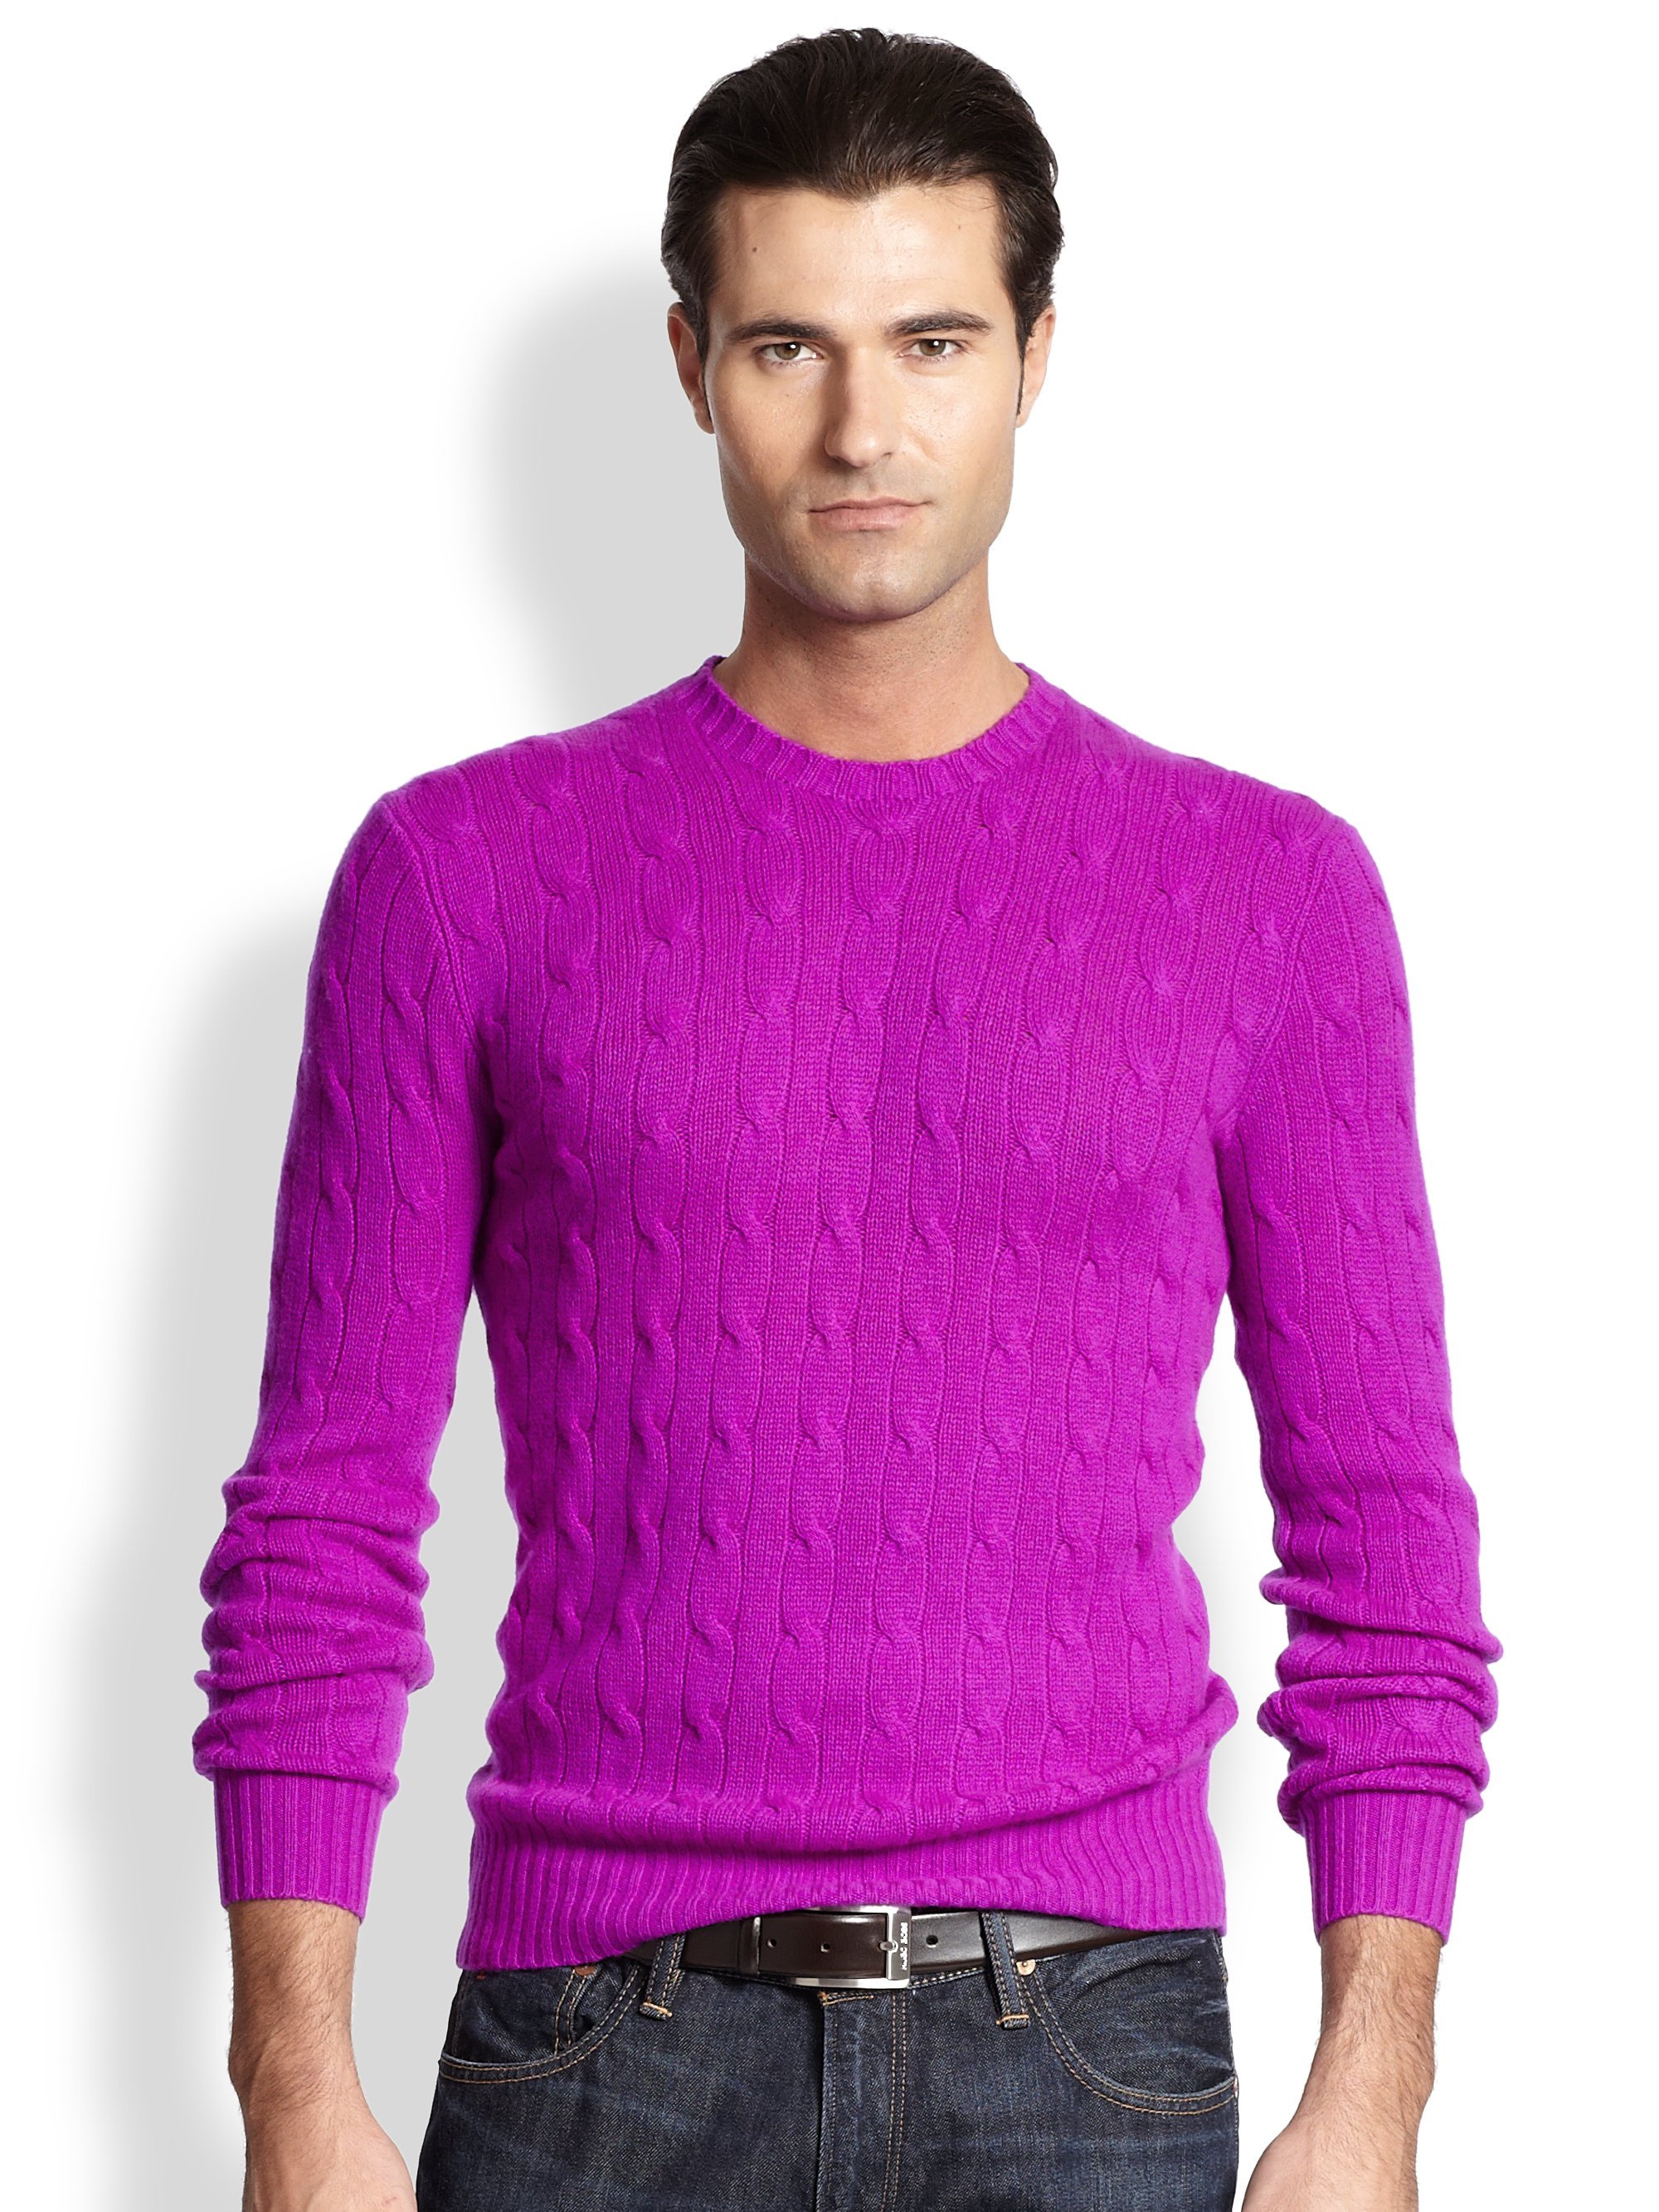 Polo Ralph Lauren Cable-knit Cashmere Sweater in Purple for Men - Lyst